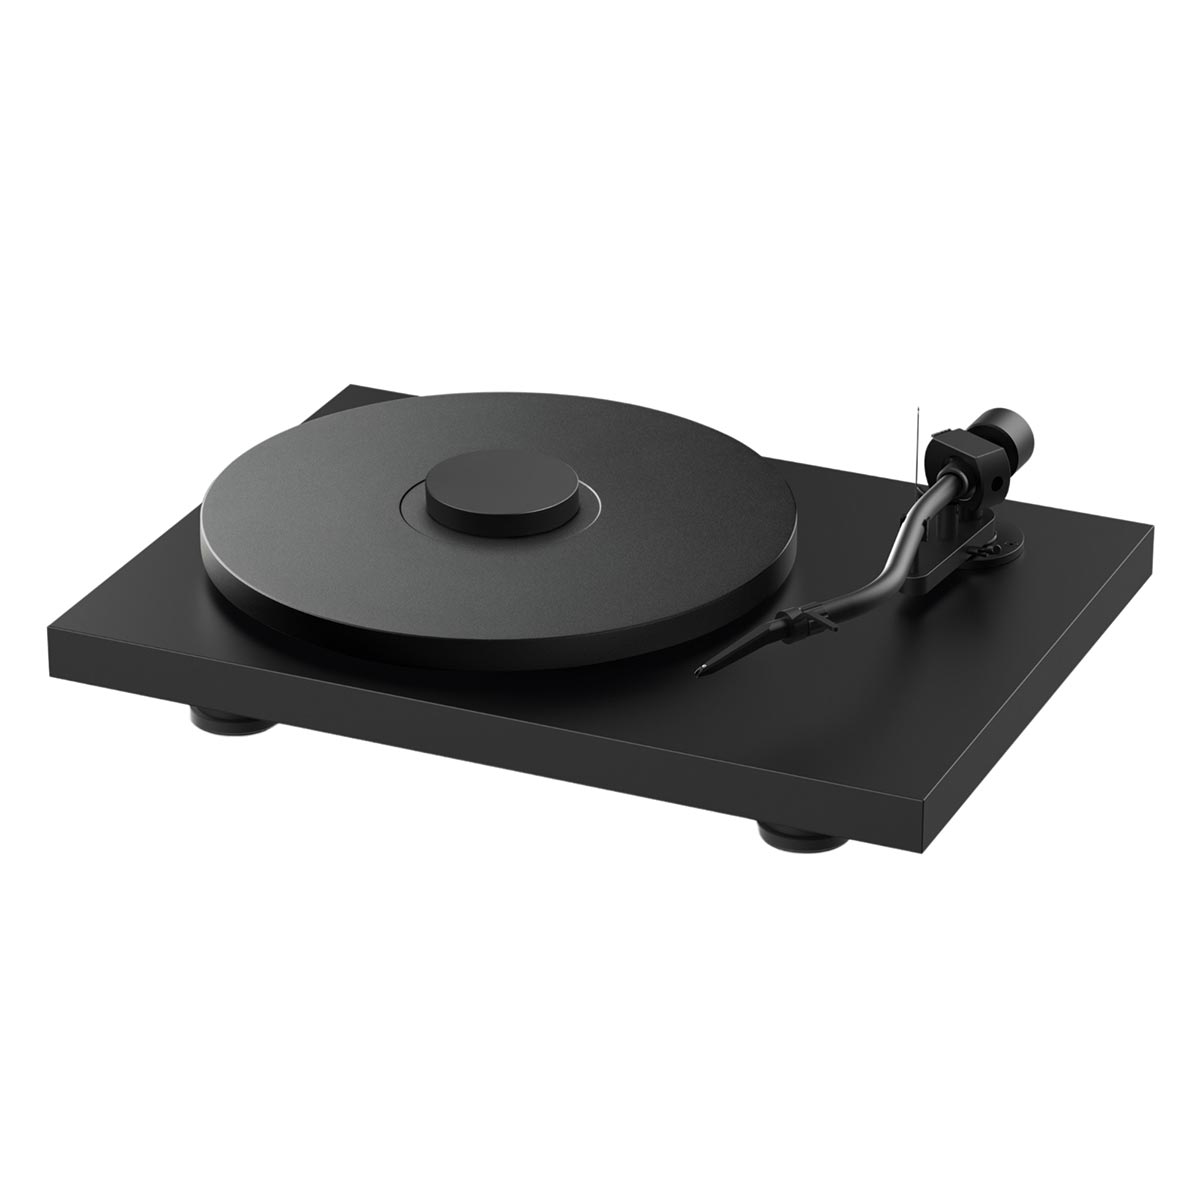 Pro-Ject Debut PRO Turntable with Pick It Pro Cartridge - Satin Black